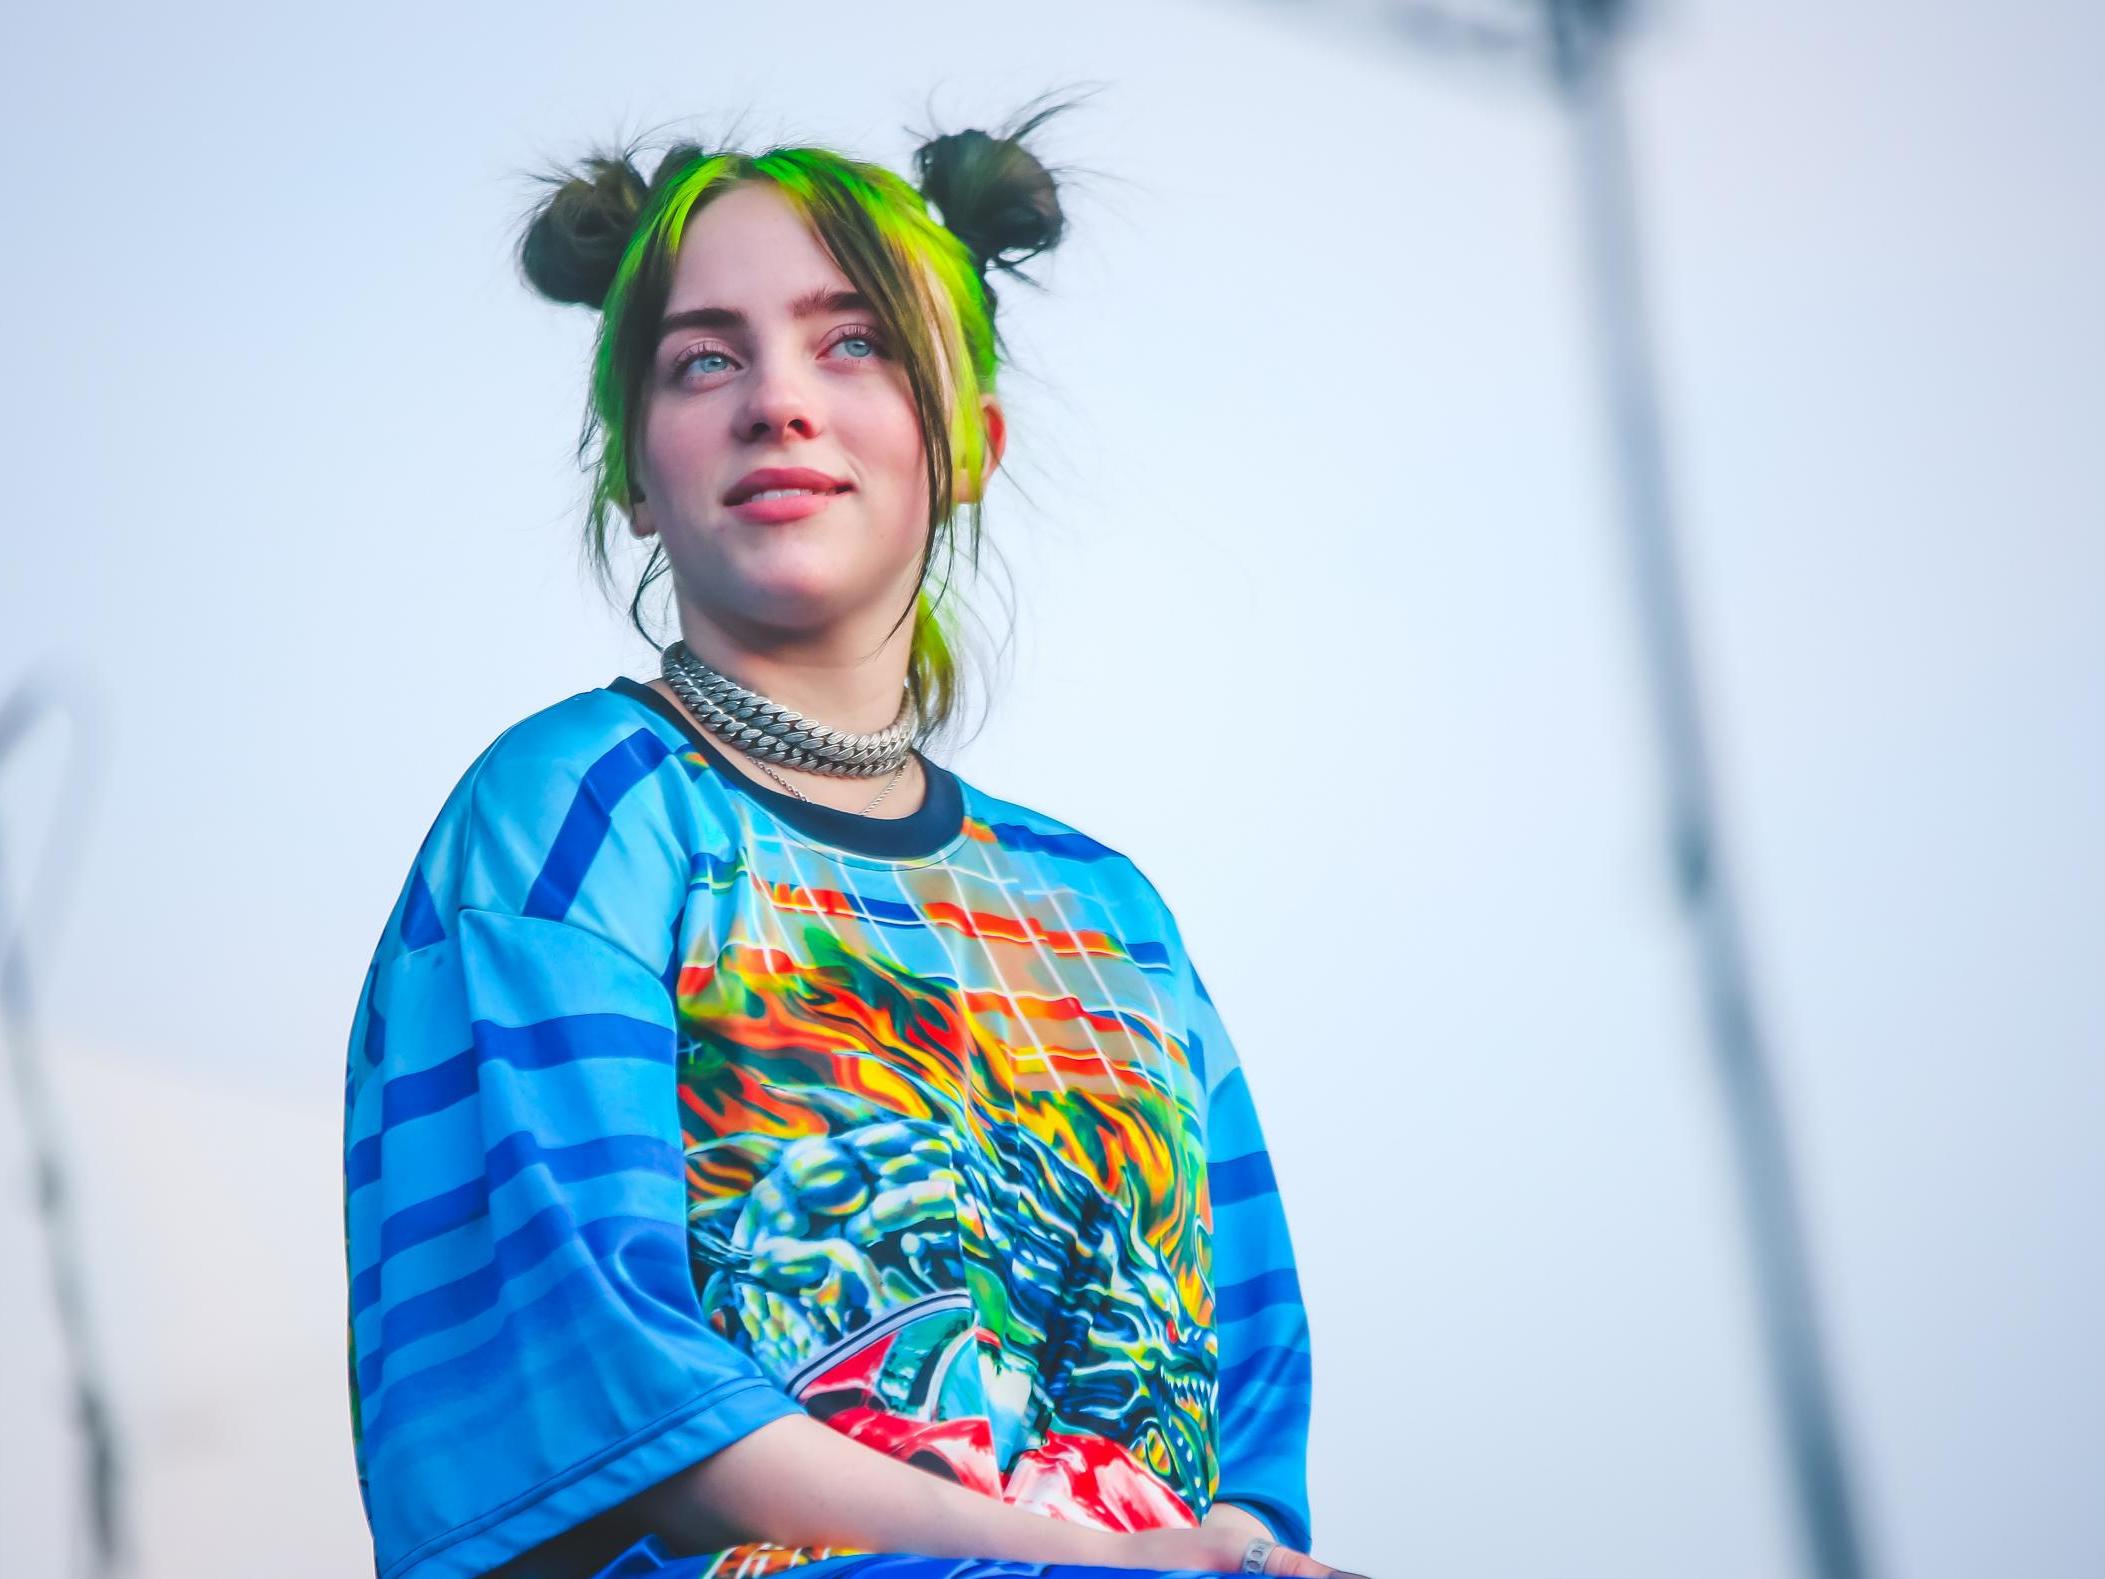 Billie Eilish Gets Sporty in Jersey for Leeds Festival Performance